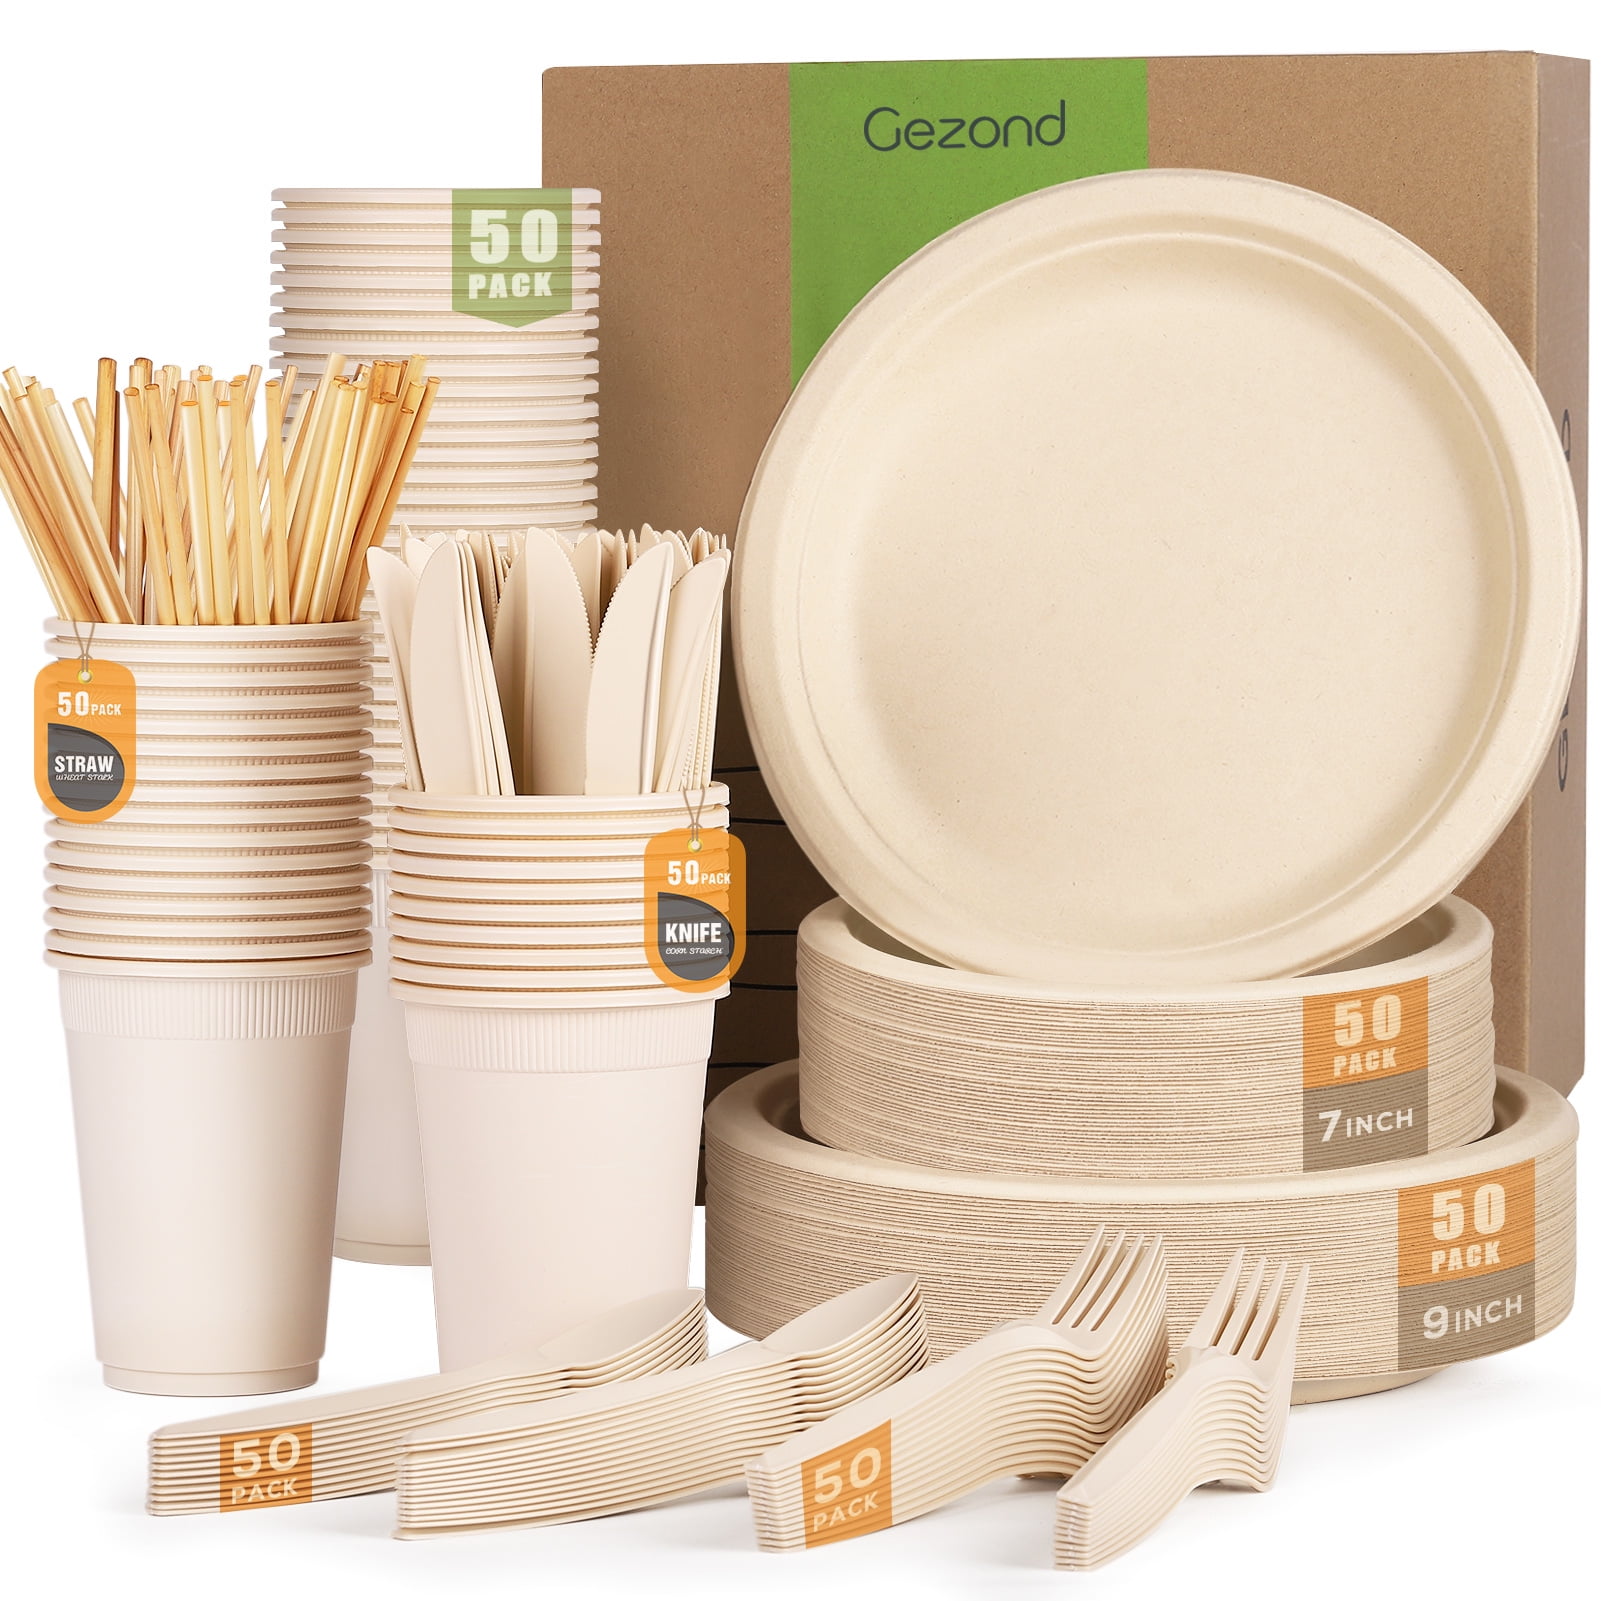 EATWARE COMPOSTABLE FOOD CONTAINERS, Eatware Milwaukee, Biodegradeable  plates and dinner ware, biodegradeable disposable plates, Eatware  eco-friendly disposable plates and bowls, sustainable disposable plates